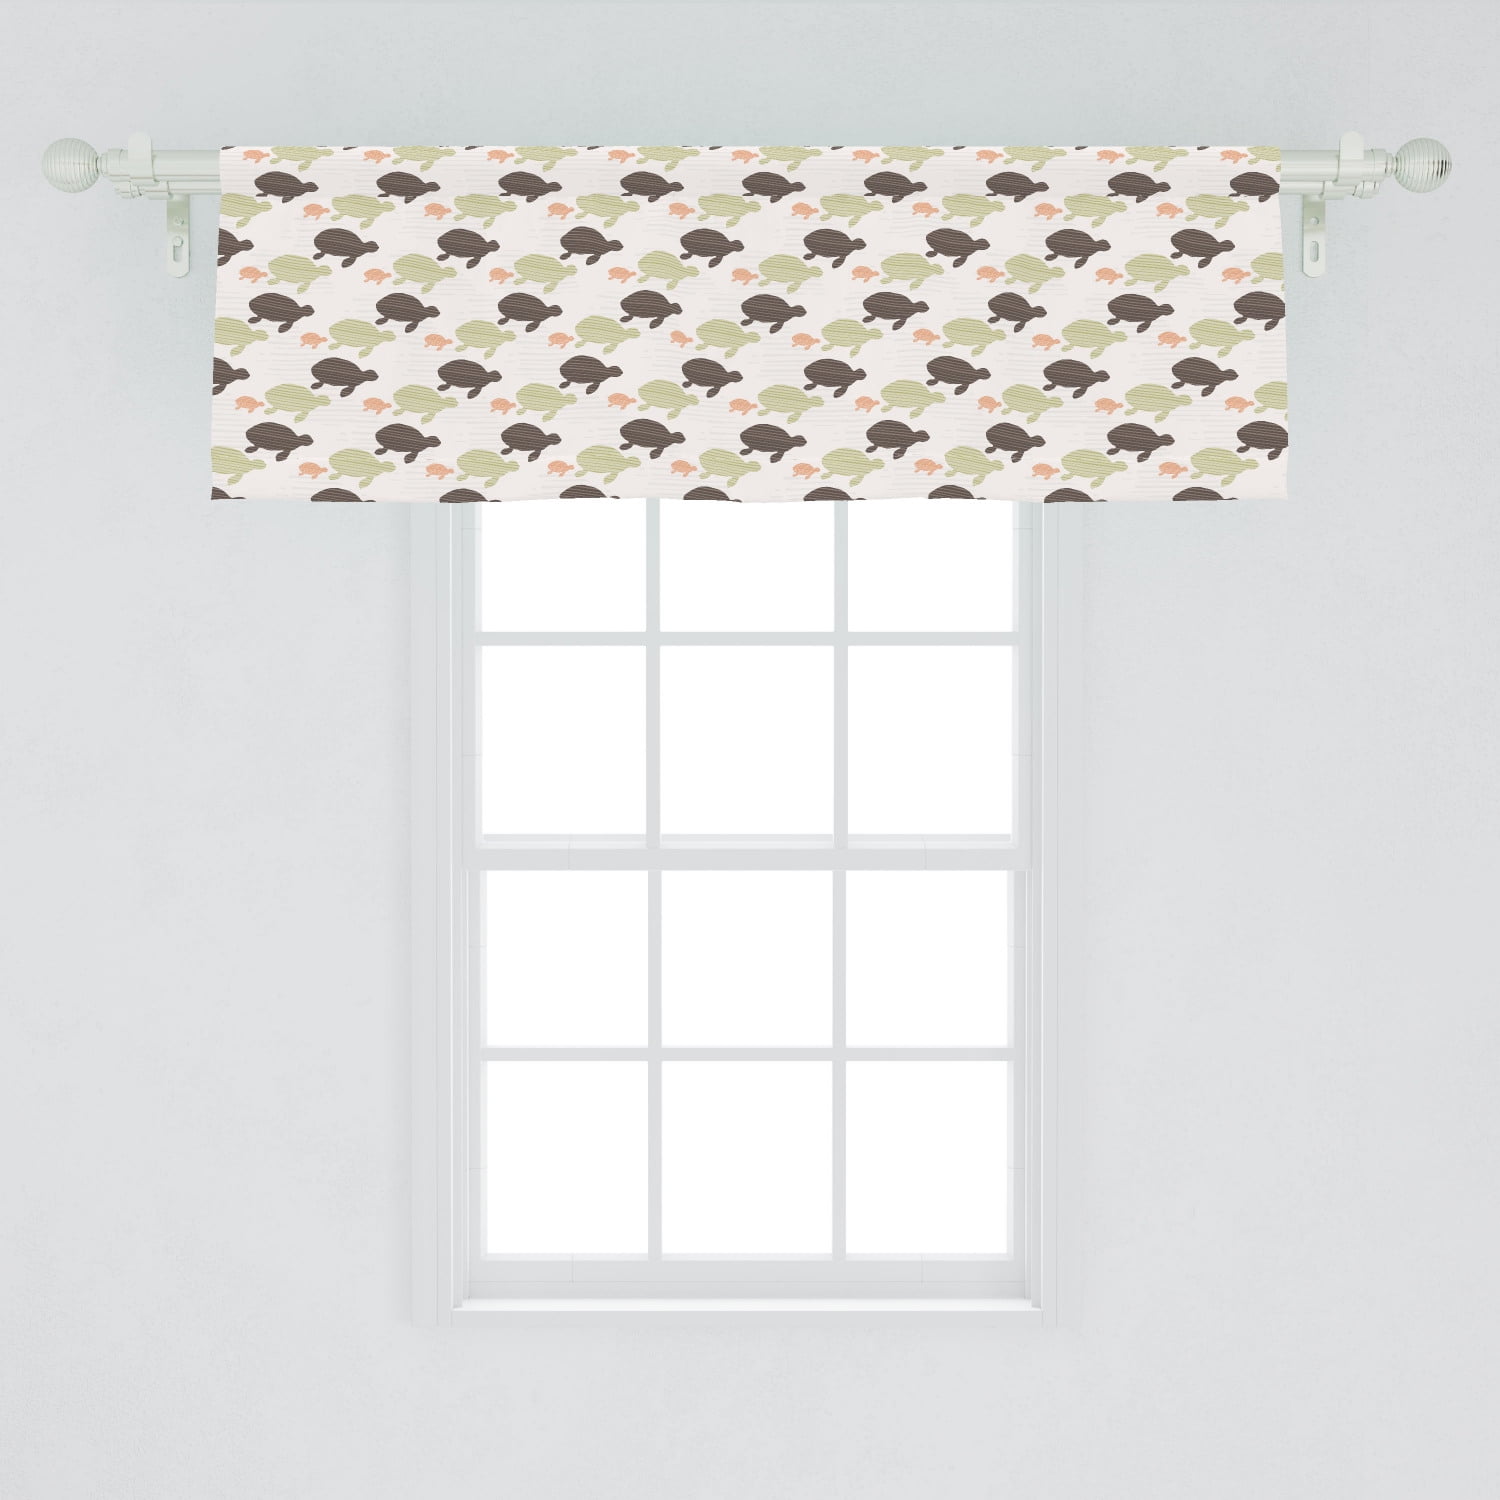 Animal Art Window Valance Colorful Turtle Silhouettes With Striped Design On Plain Backdrop Curtain Valance For Kitchen Bedroom Decor With Rod Pocket By Ambesonne Walmart Com Walmart Com